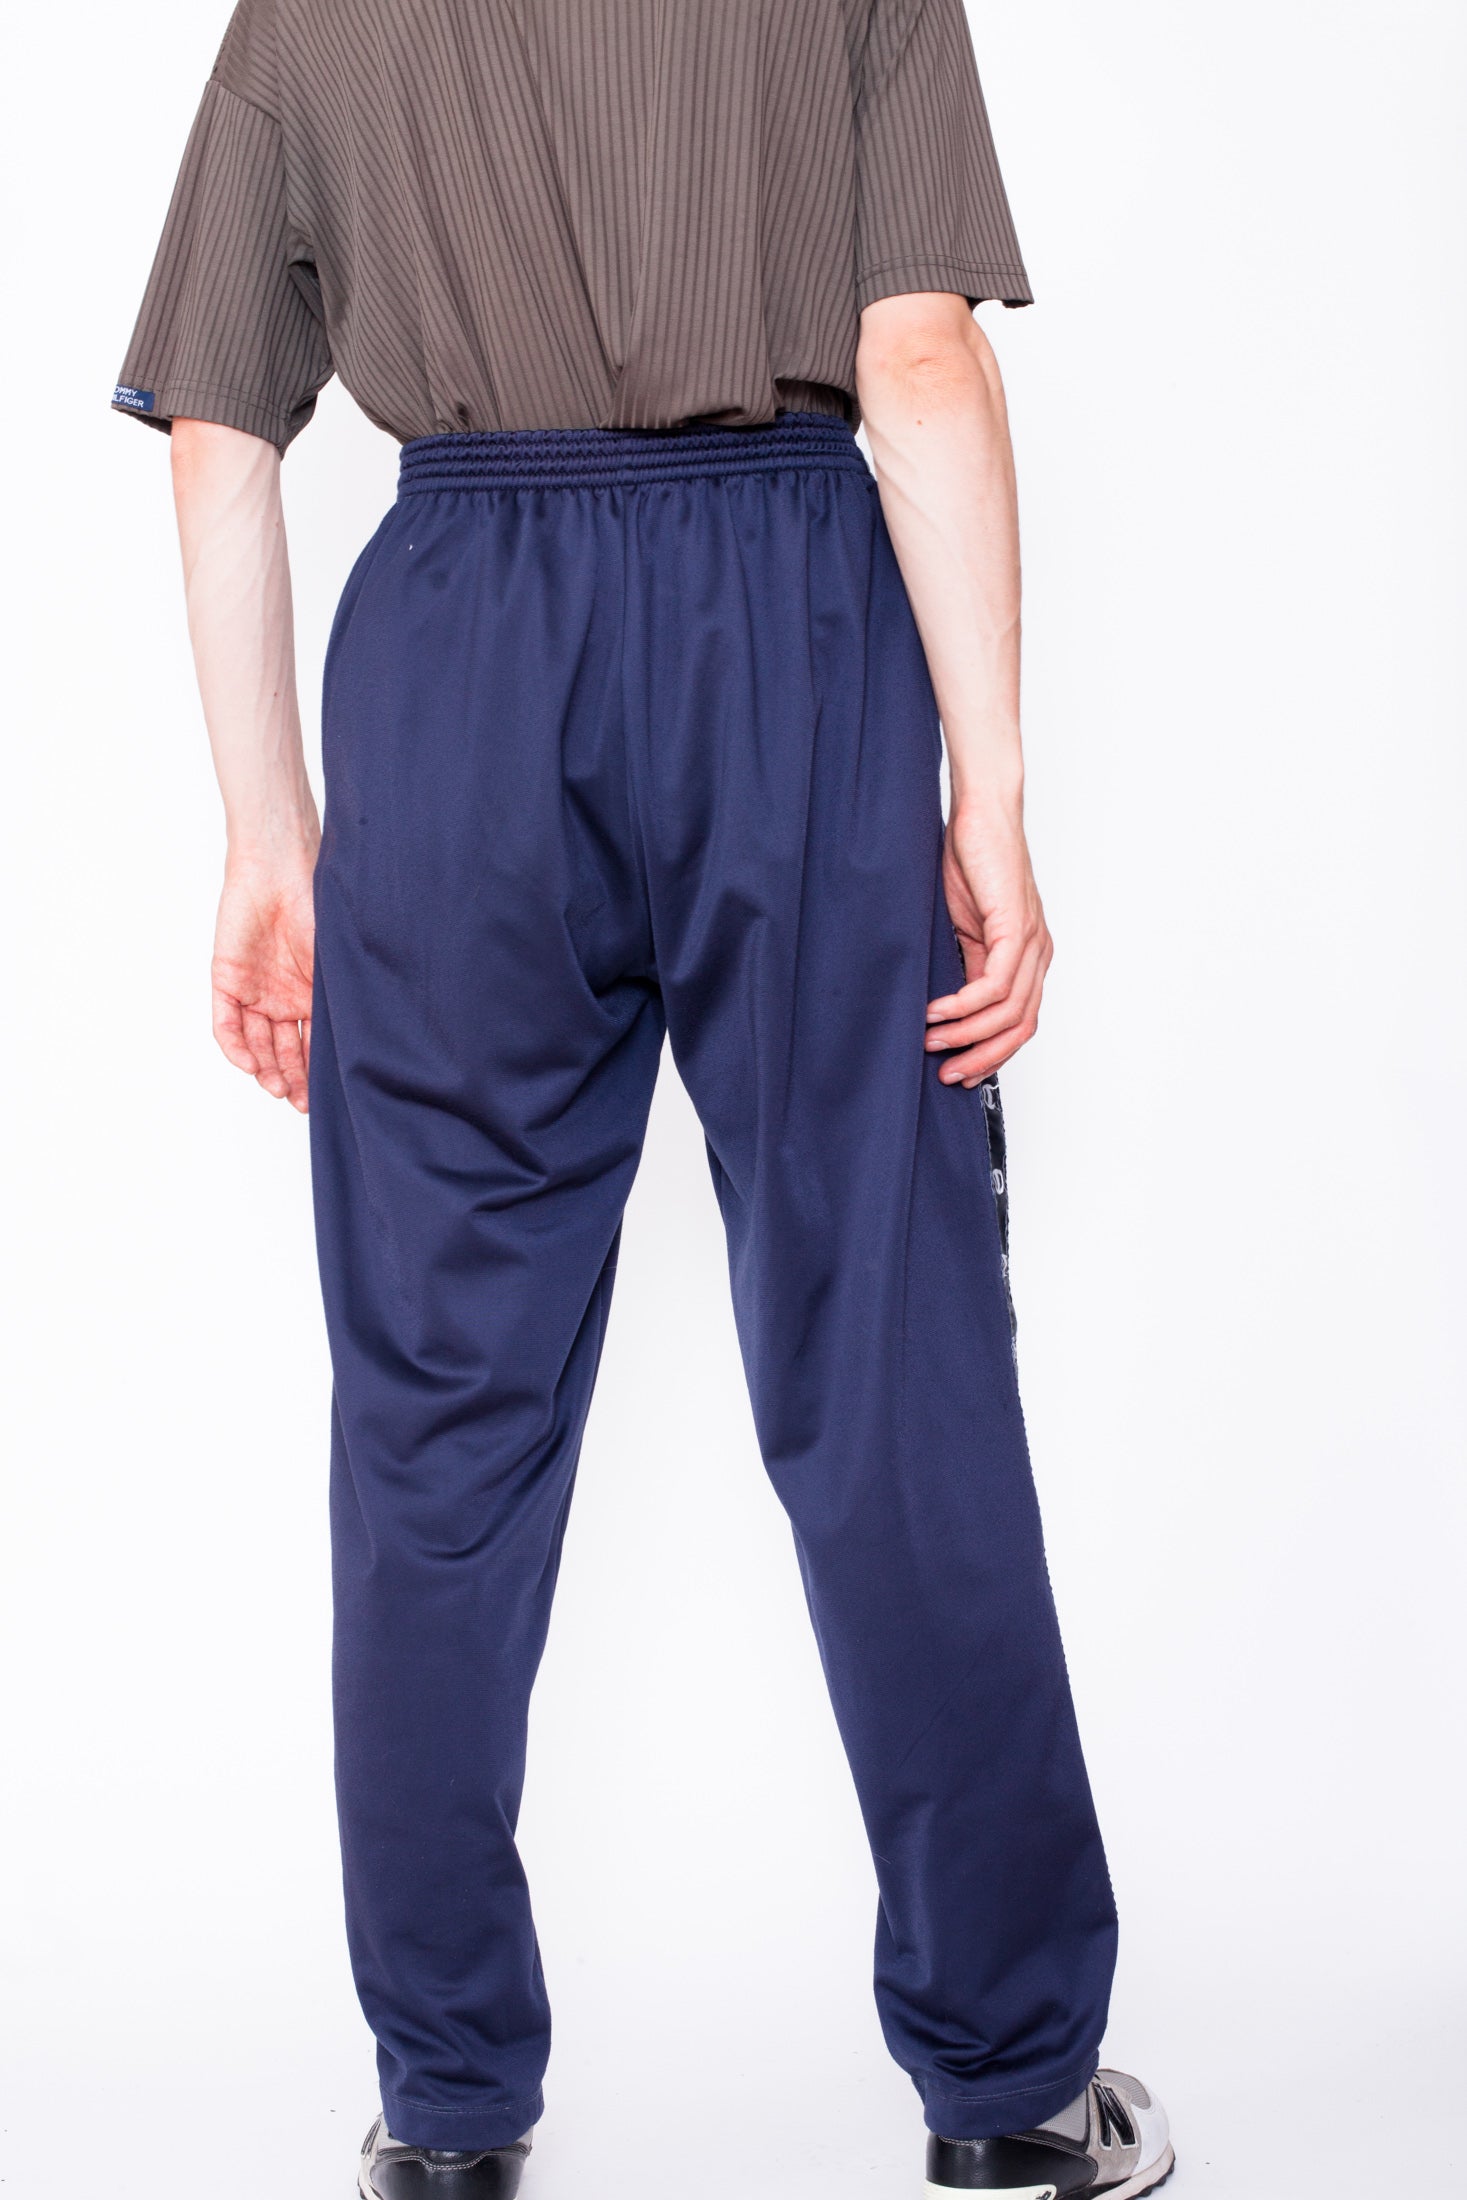 Buy Vintage Track Pants Online In India  Etsy India